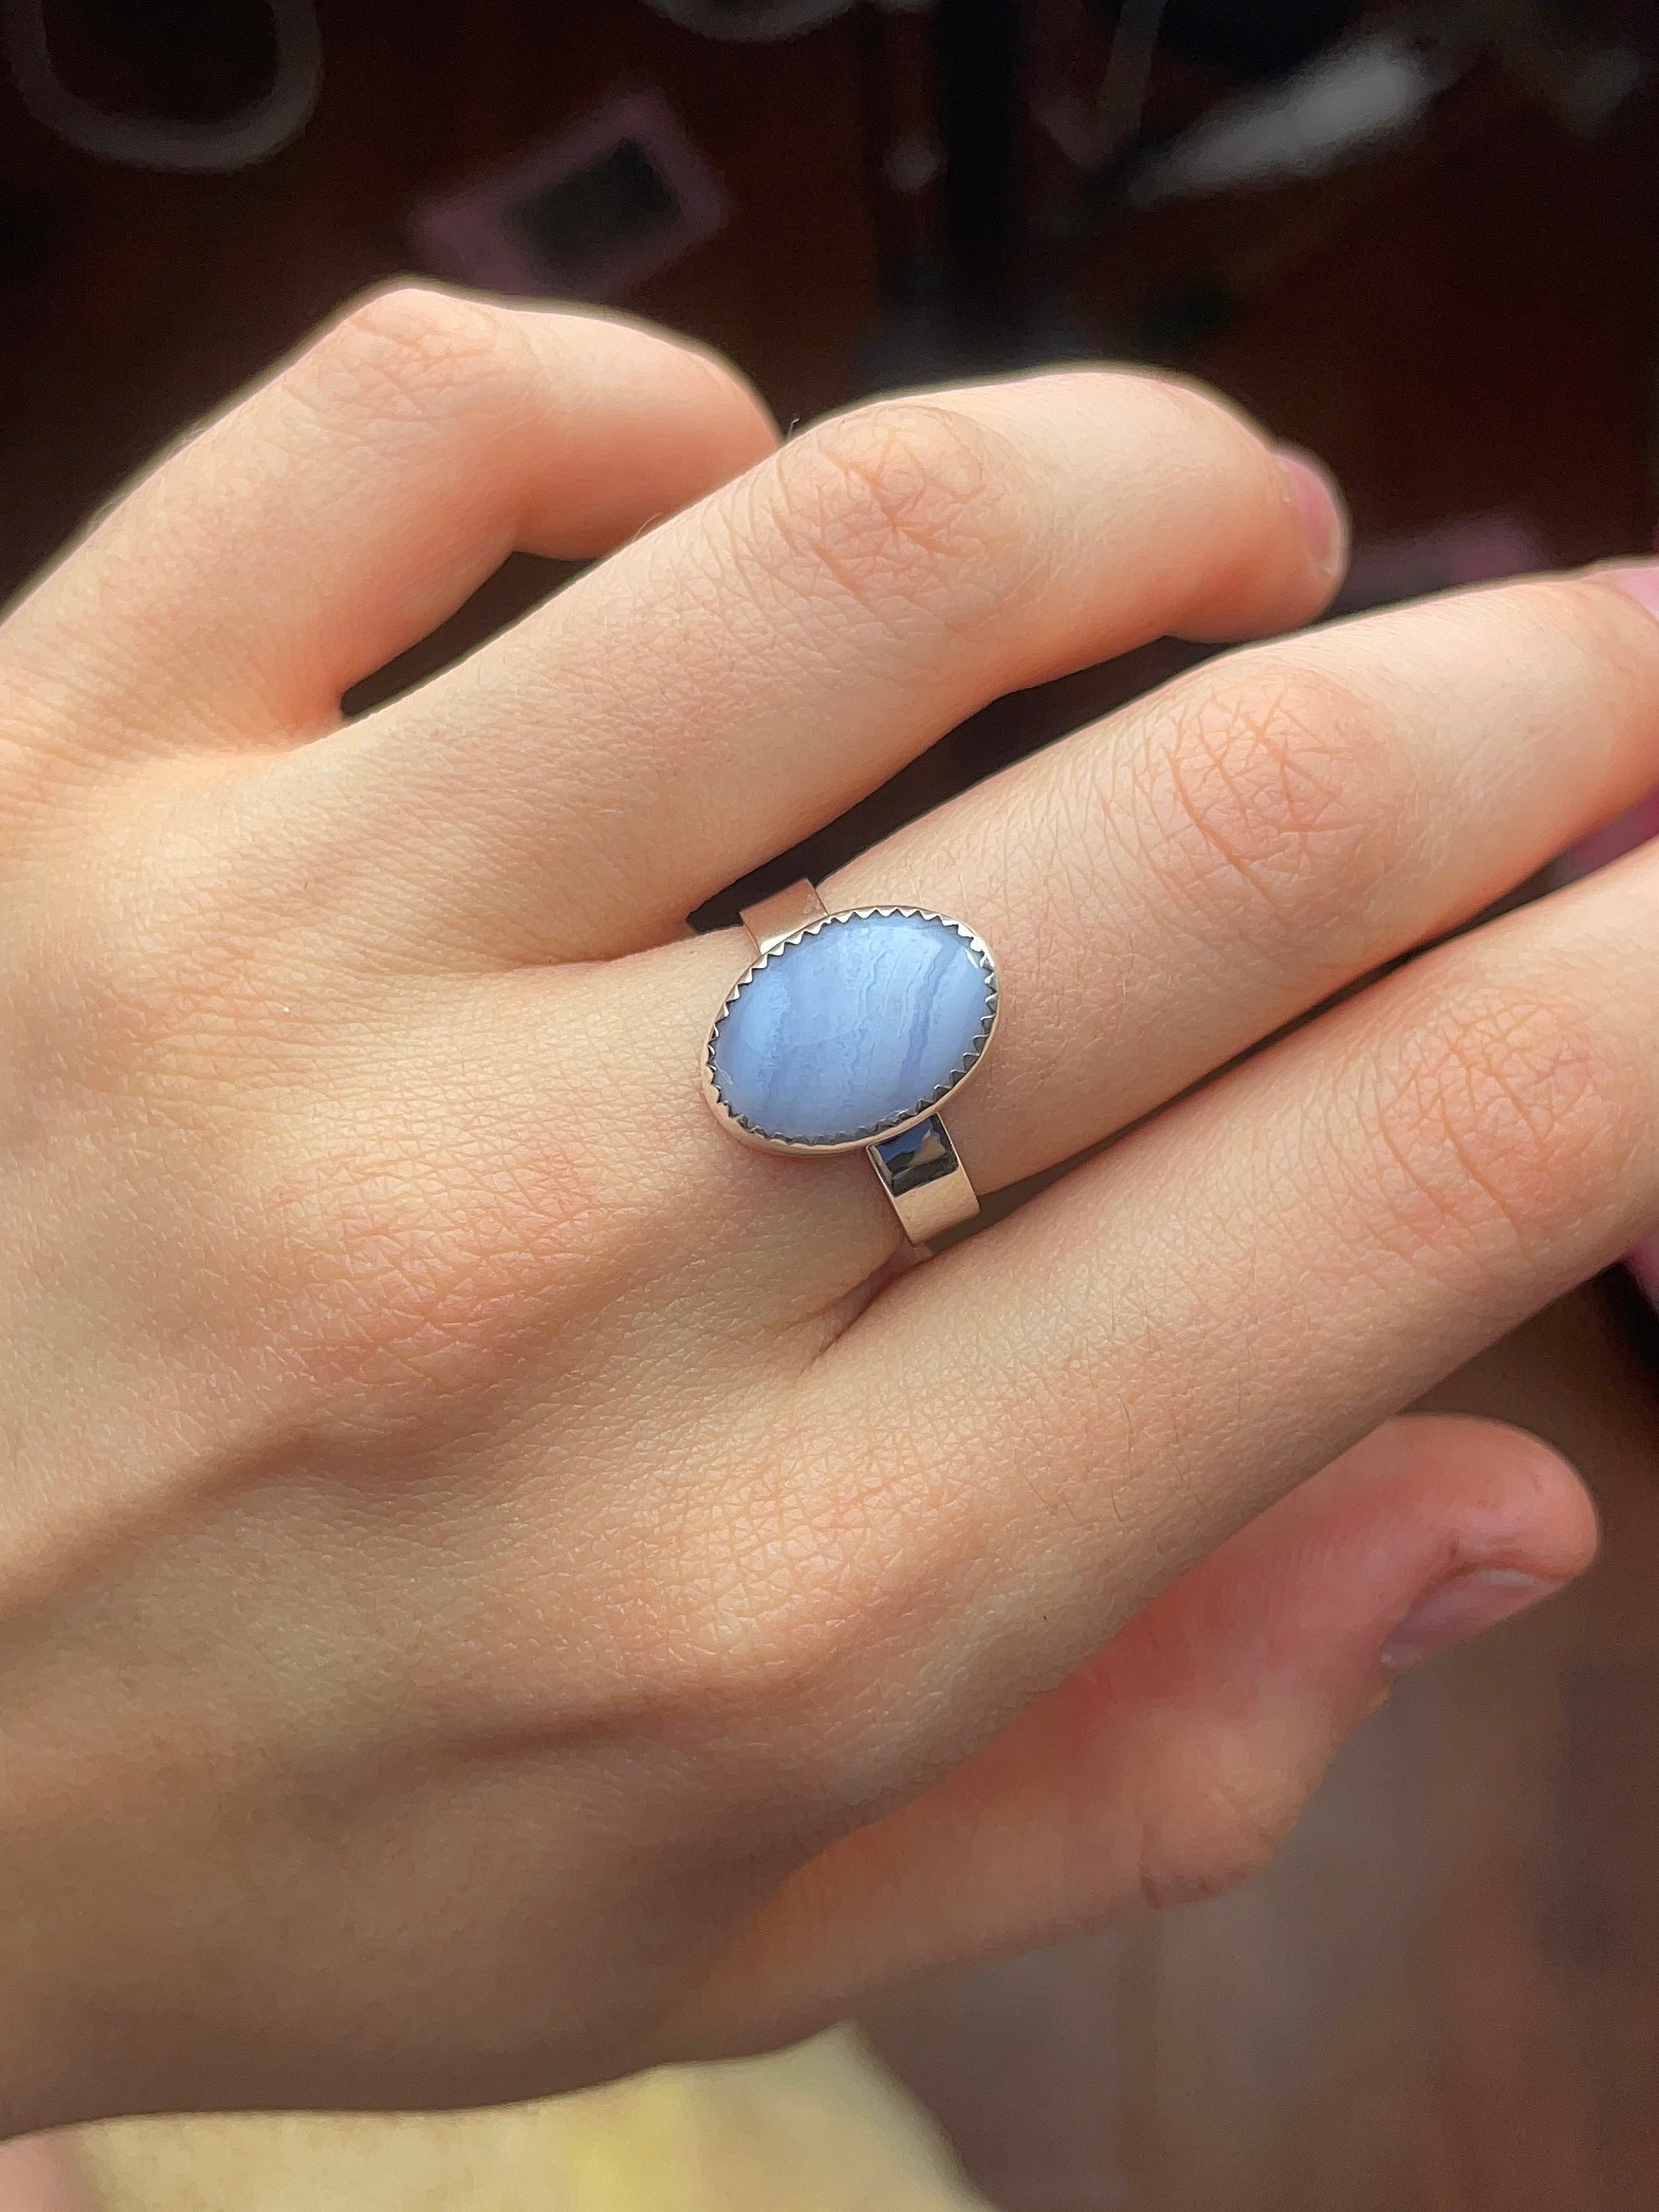 Blue Lace Agate Ring - Size 7